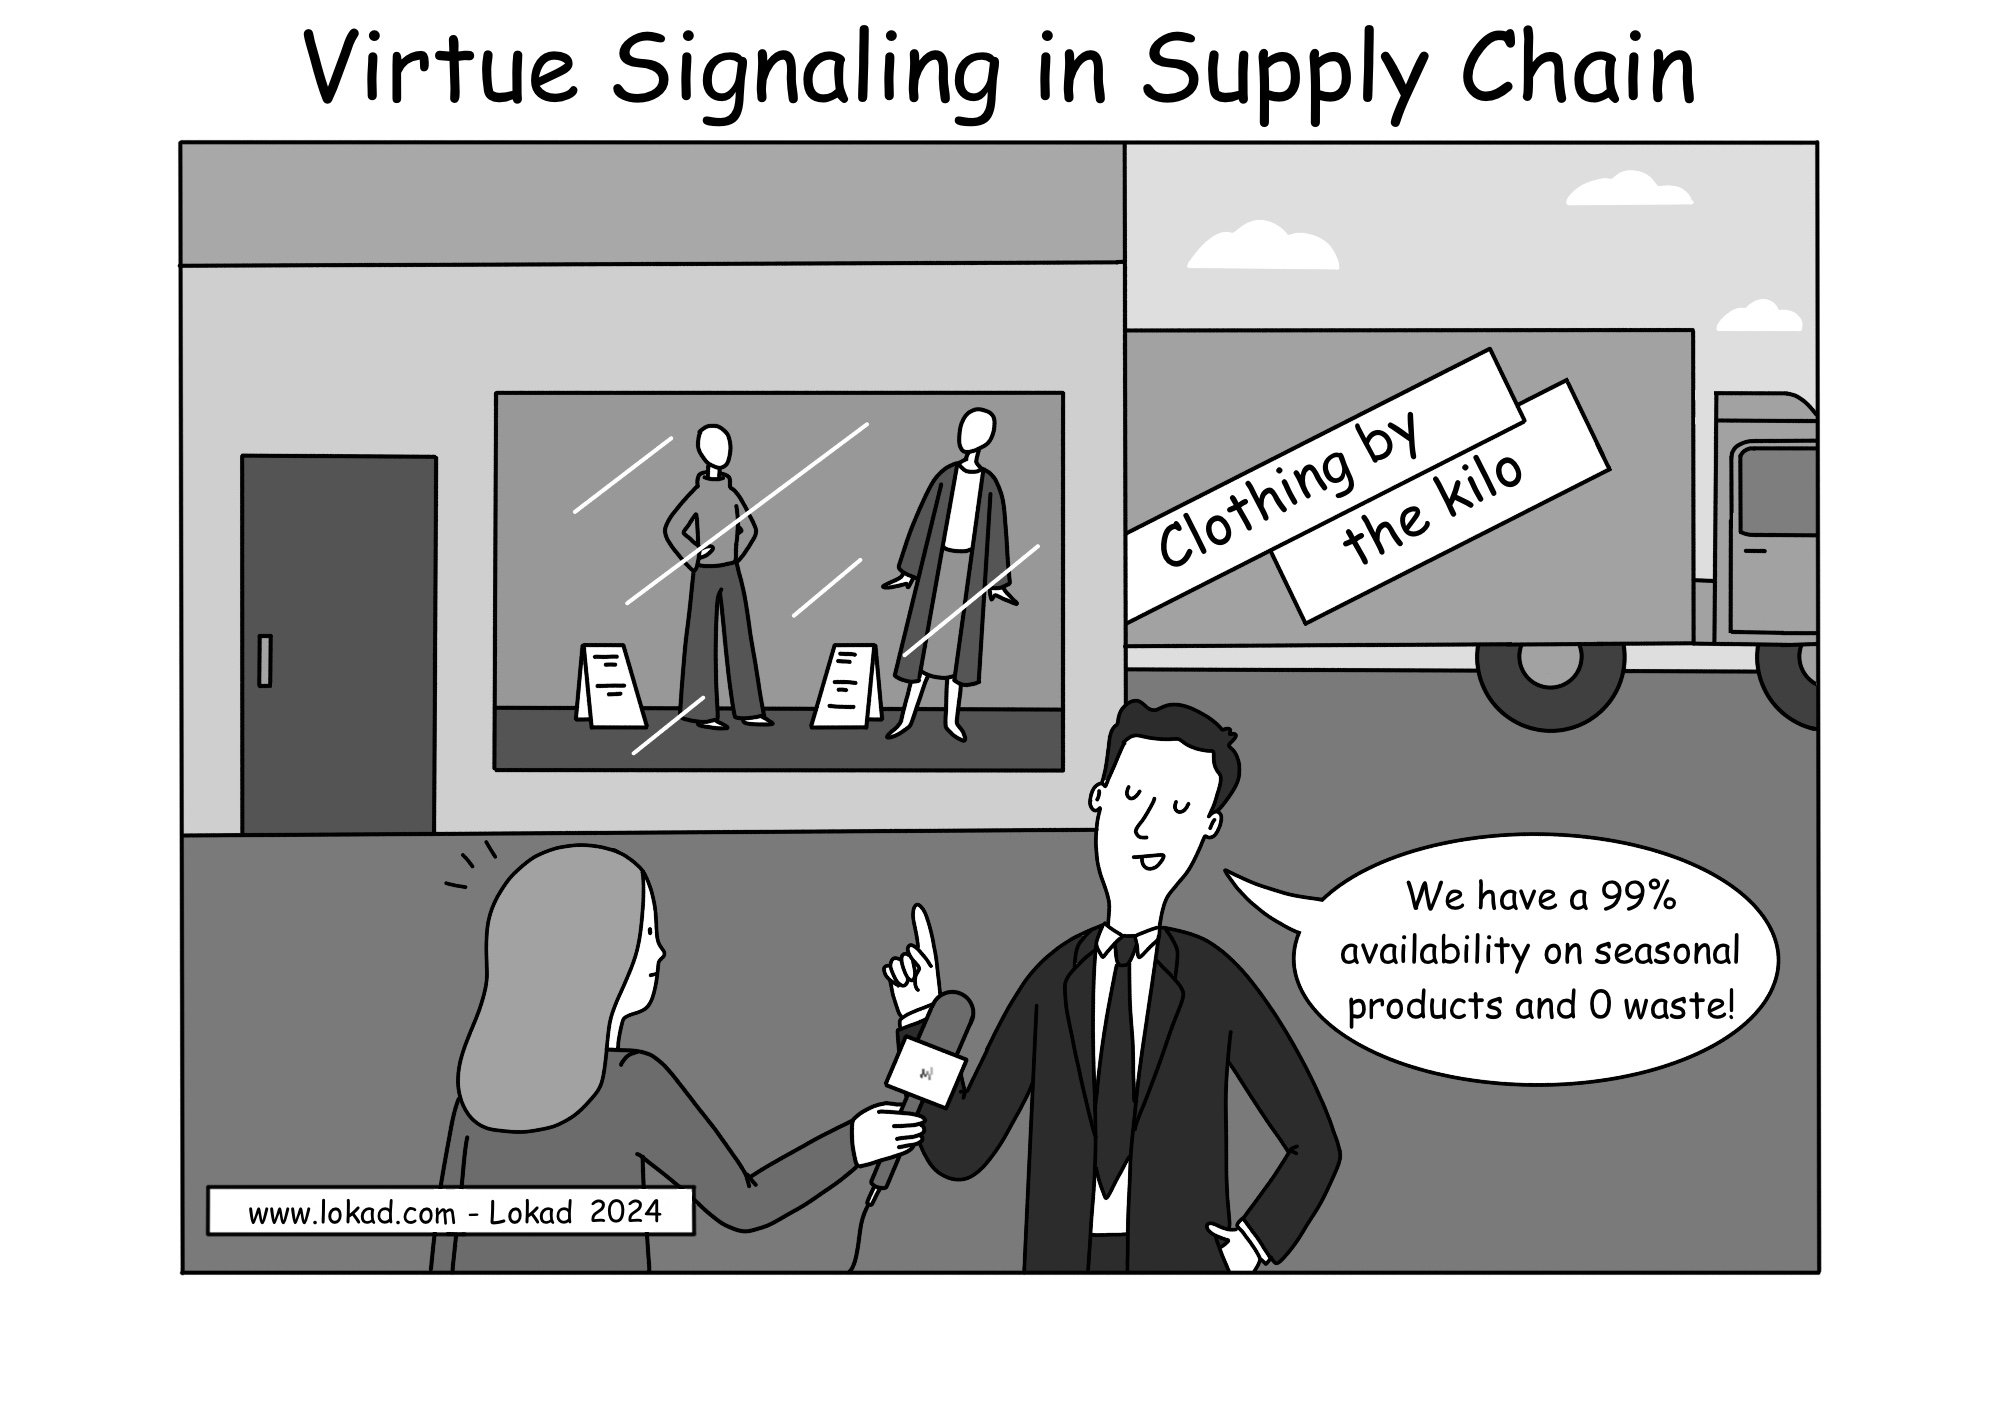 A comic from Lokad's supply chain series titled: Virtue Signaling in Supply Chain. The scene depicts a clothing store window with mannequins dressed in a new collection. Next to it, a store director is interviewed, stating, 'We have a 99% availability on seasonal products and 0 waste!' while the interviewer holds a microphone towards him. A truck with a sign reading 'Clothing by the kilo' is leaving behind the store.